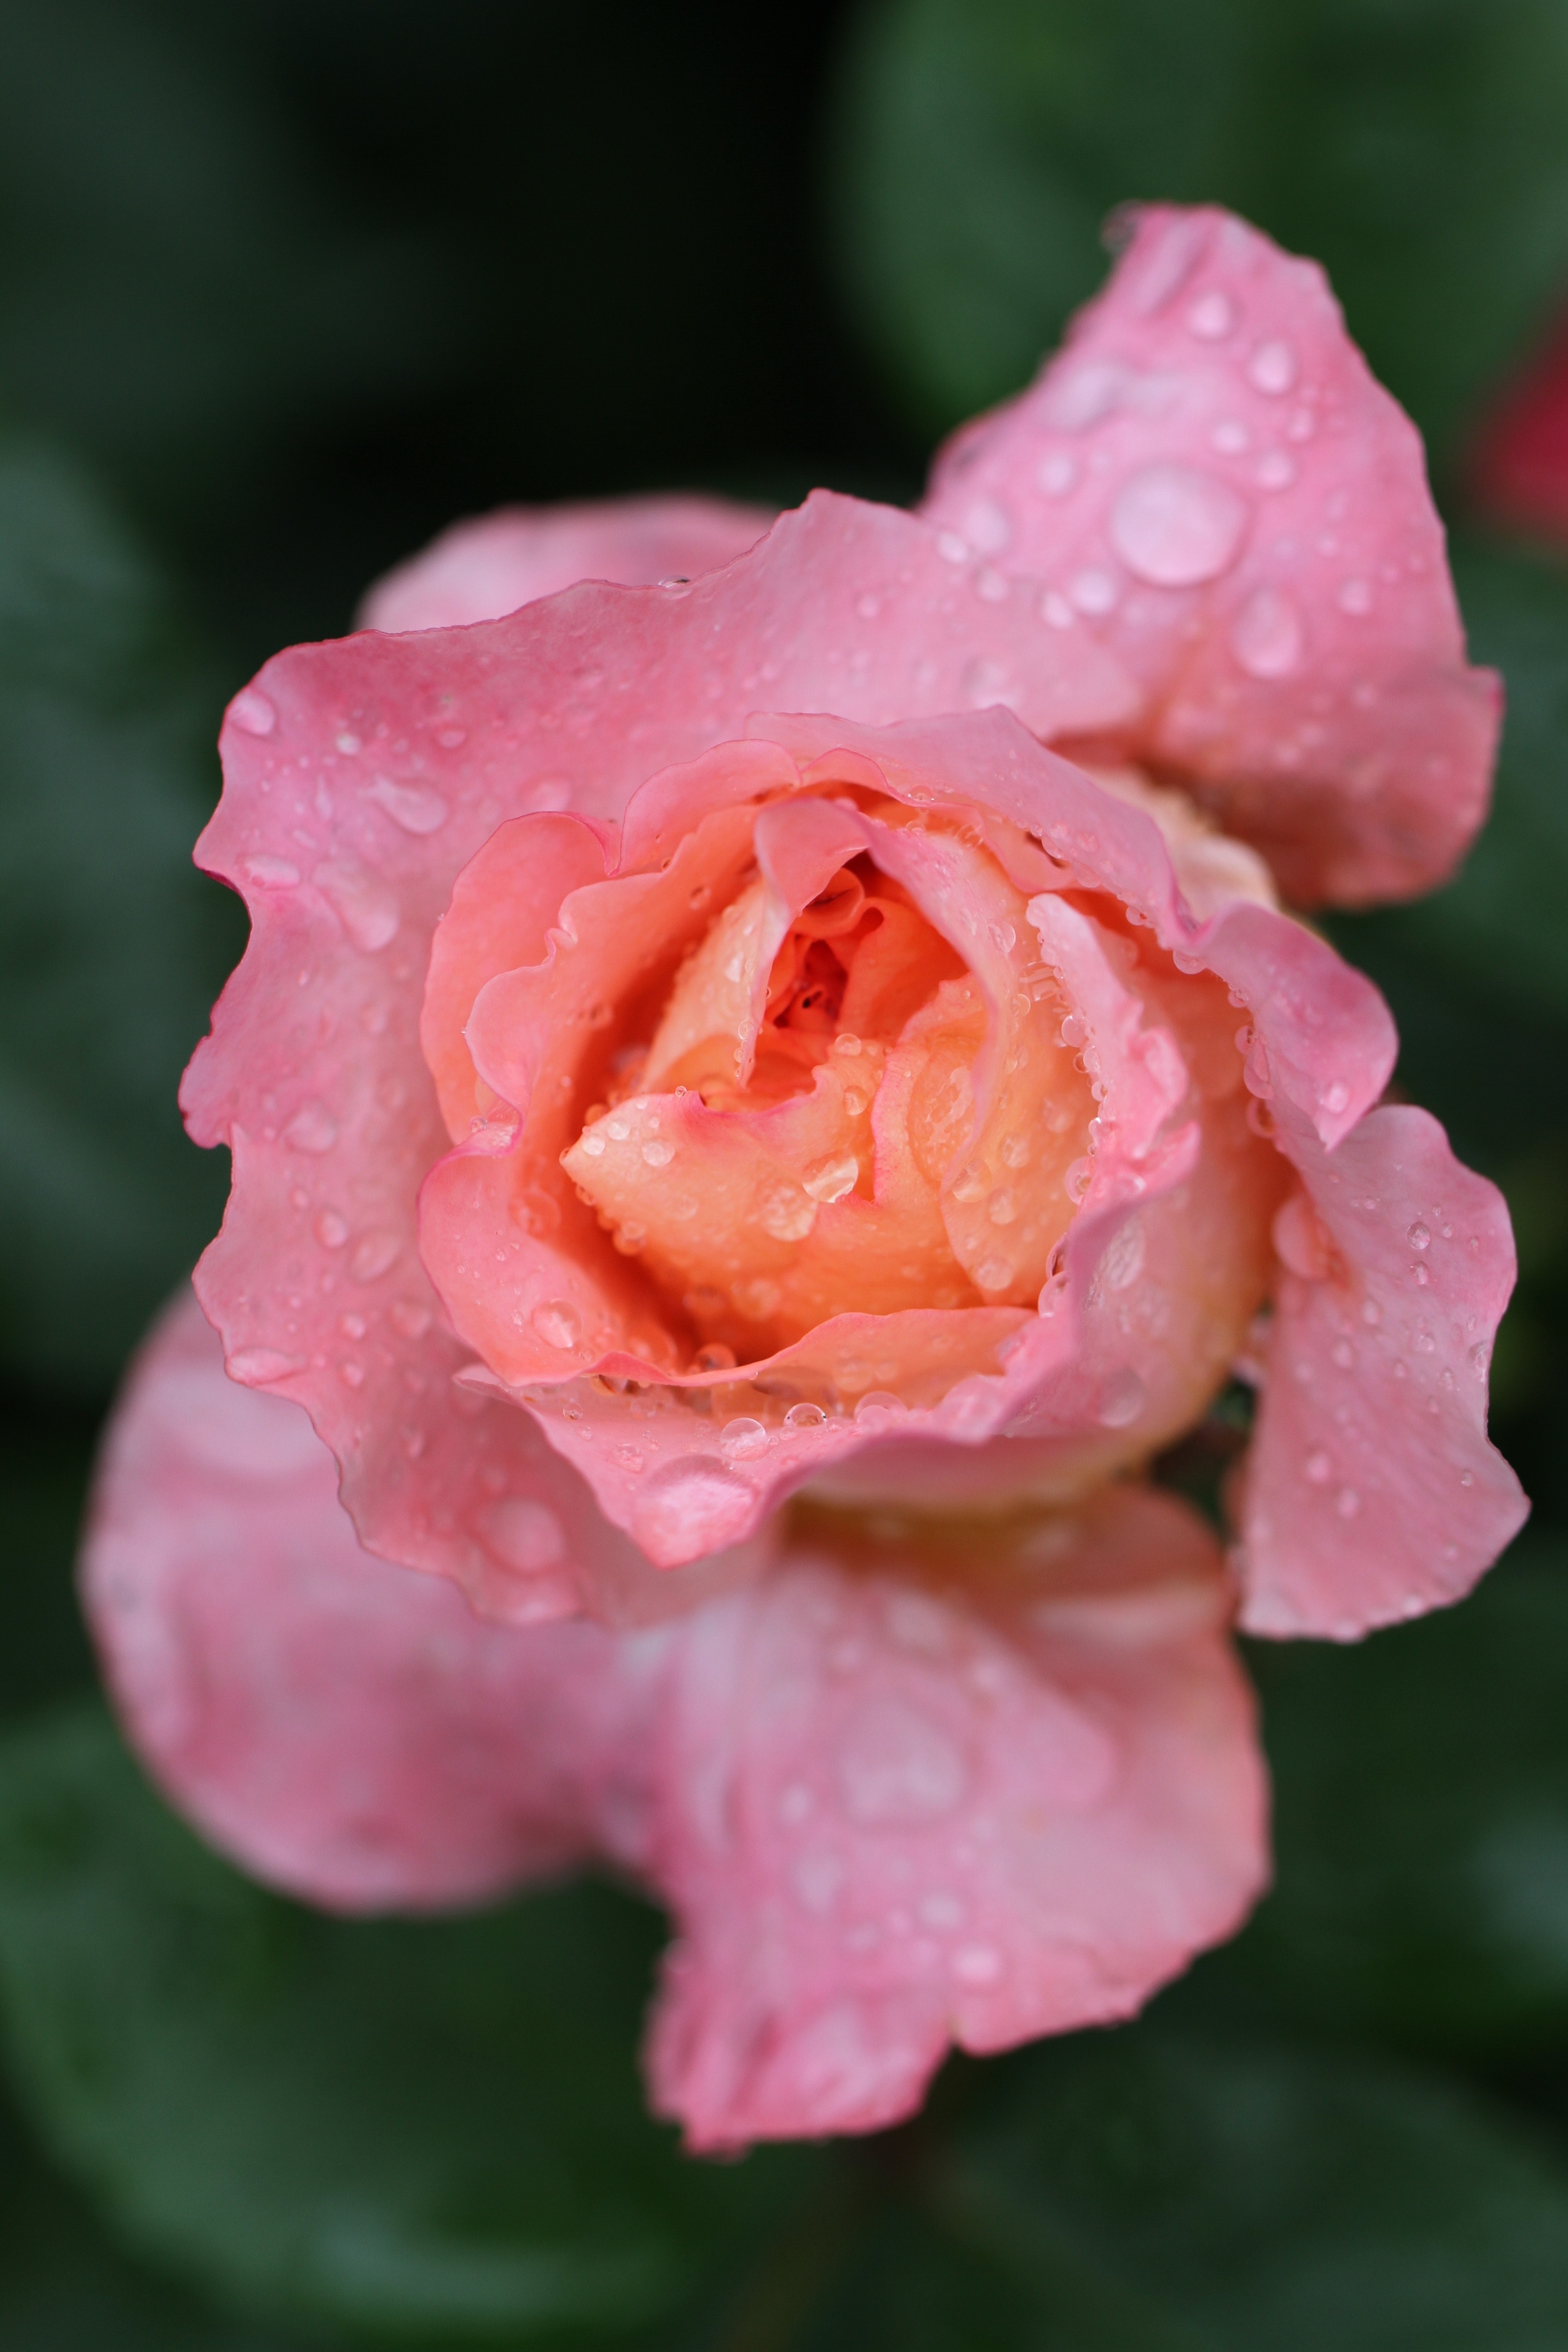 Close Up Photography of Pink Petaled Flower With Water Dew · Free ...